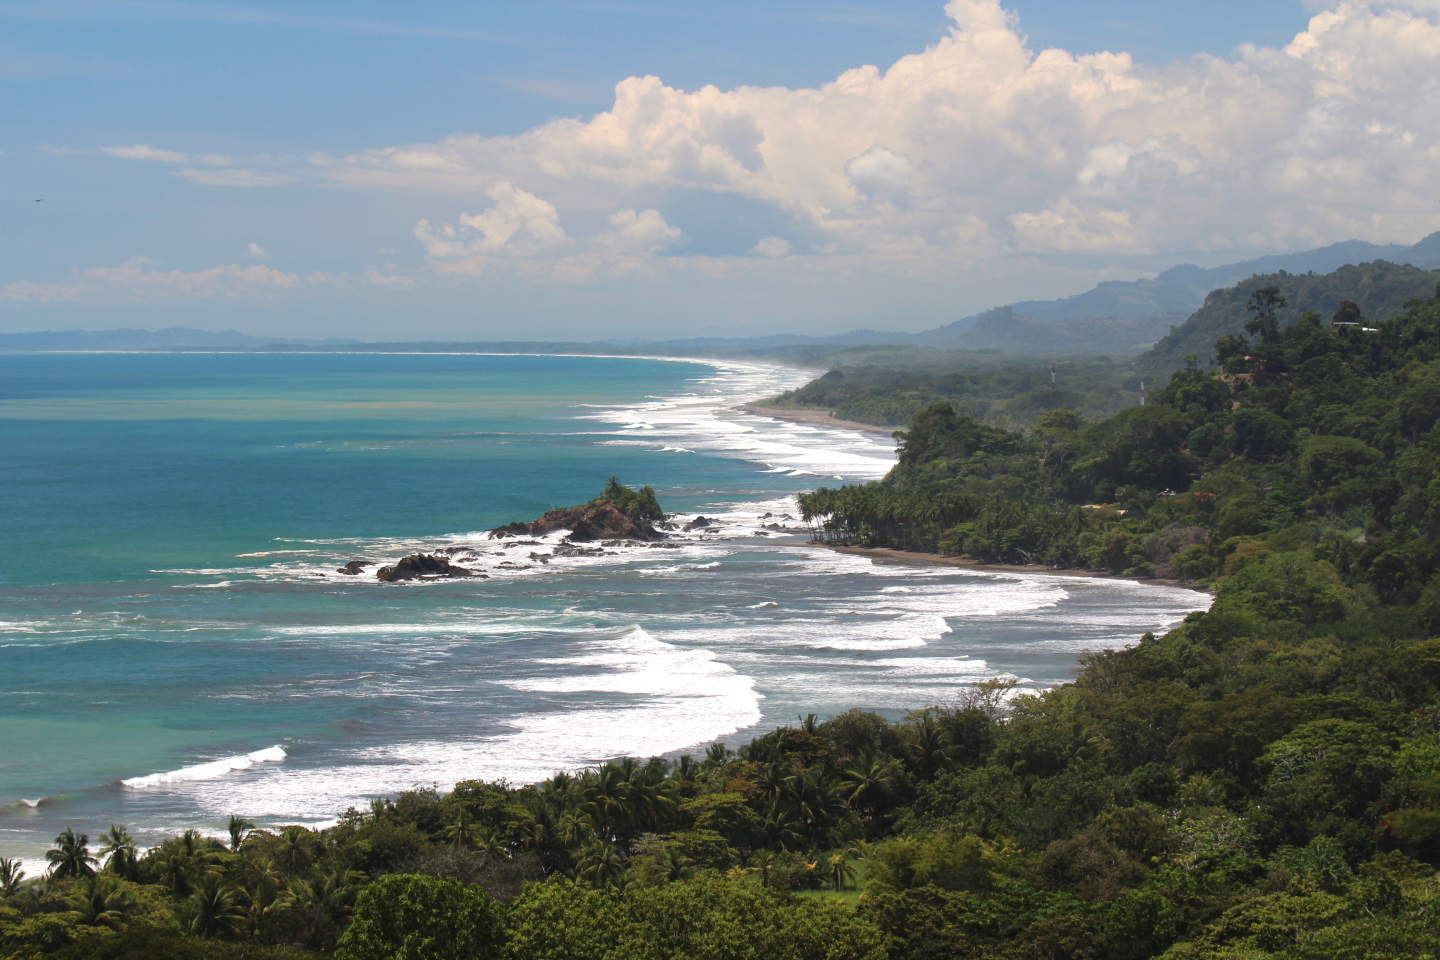 Surf Blog - ISA World Surfing Games coming to Costa Rica